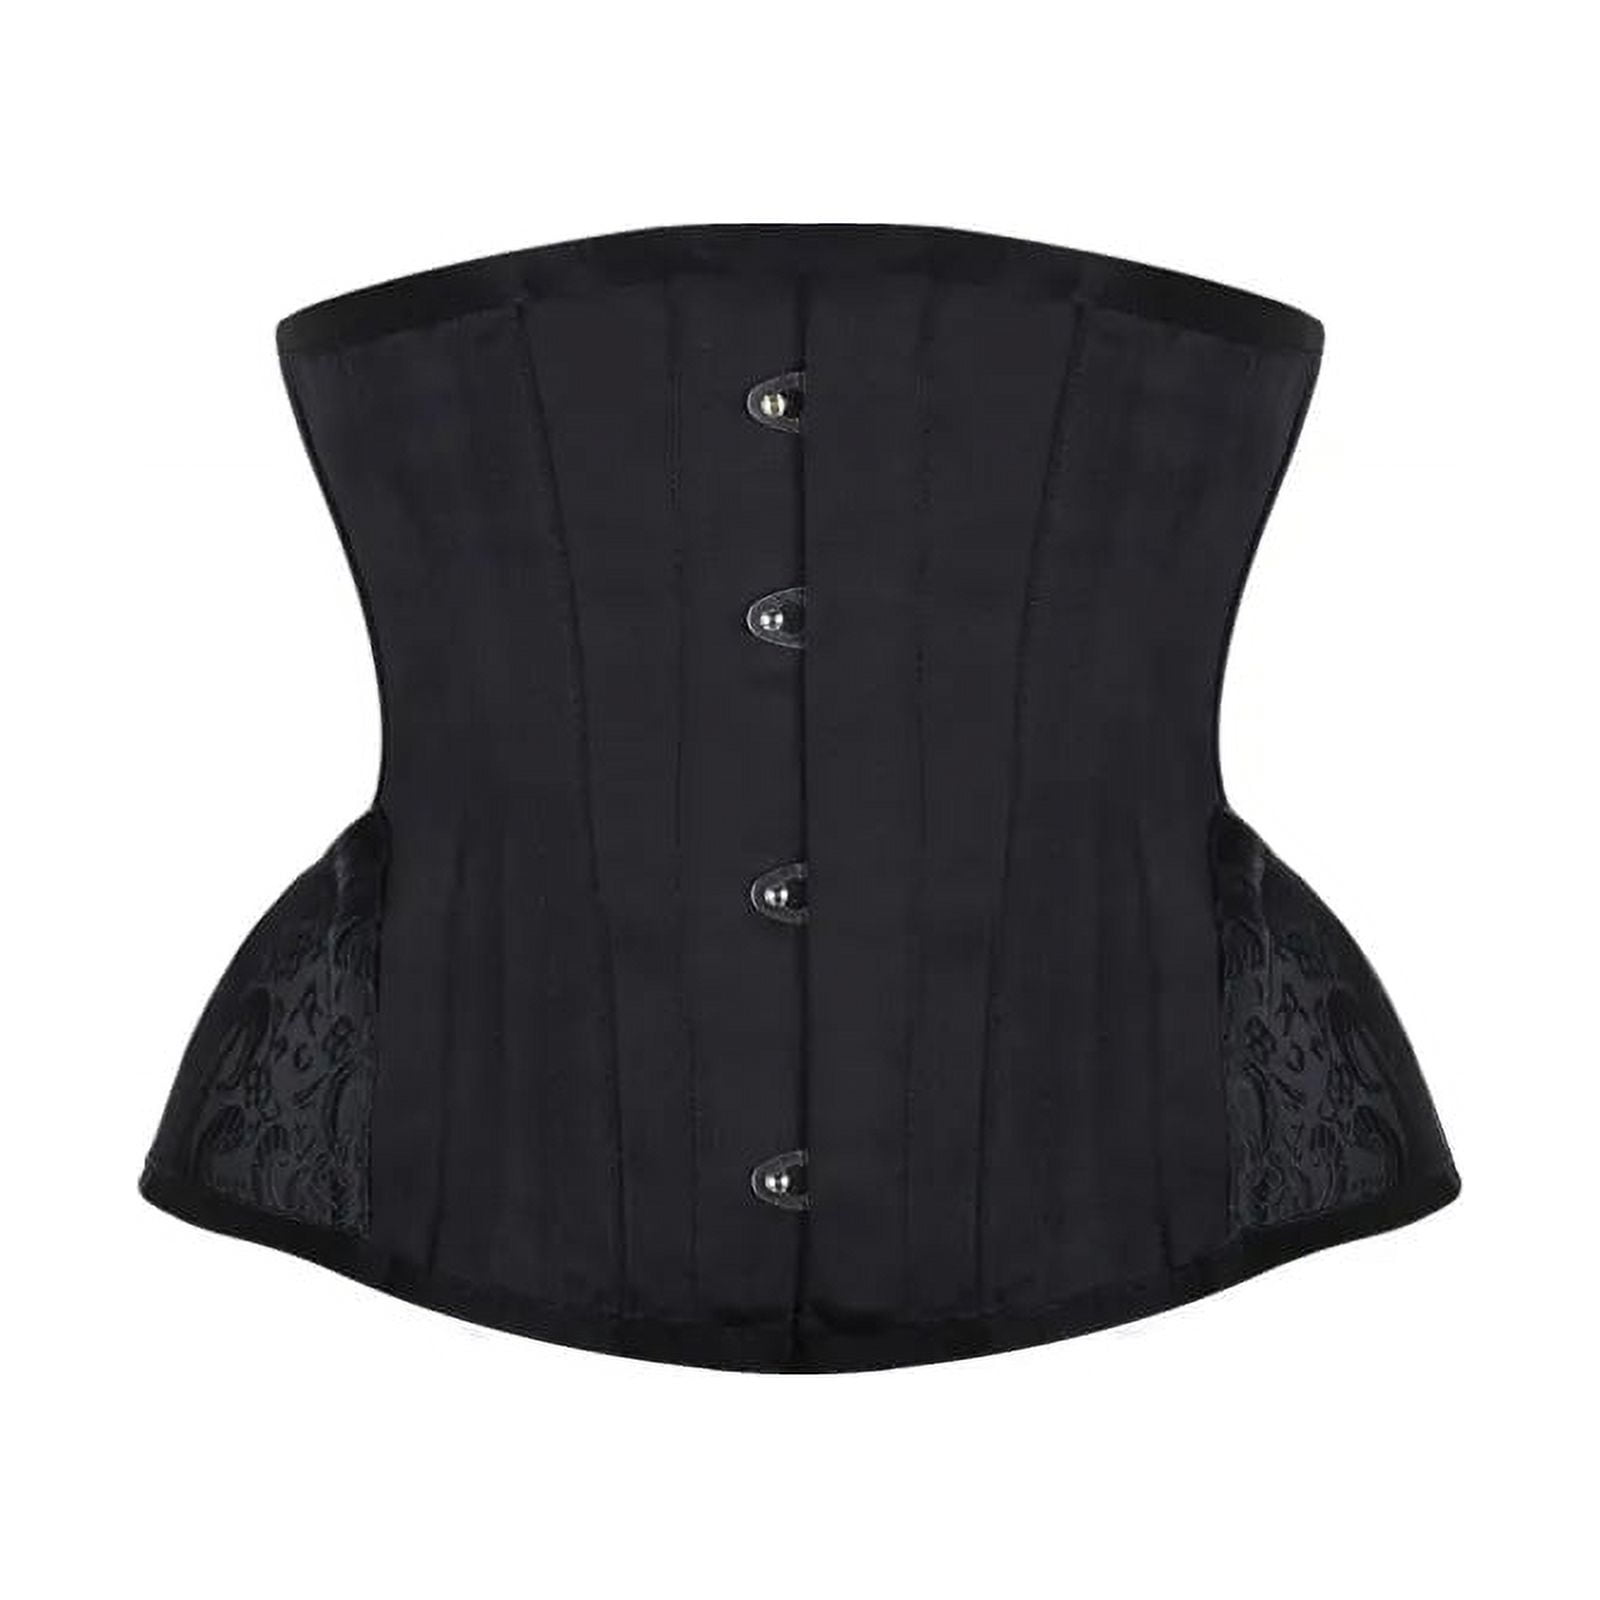 Sexy Black Pvc Overbust Corset Steampunk Basque Lingerie Top - Goth Rock  Corset Sexy Leather Waist Trainer Corset For Women - Bustiers & Corsets -  AliExpress